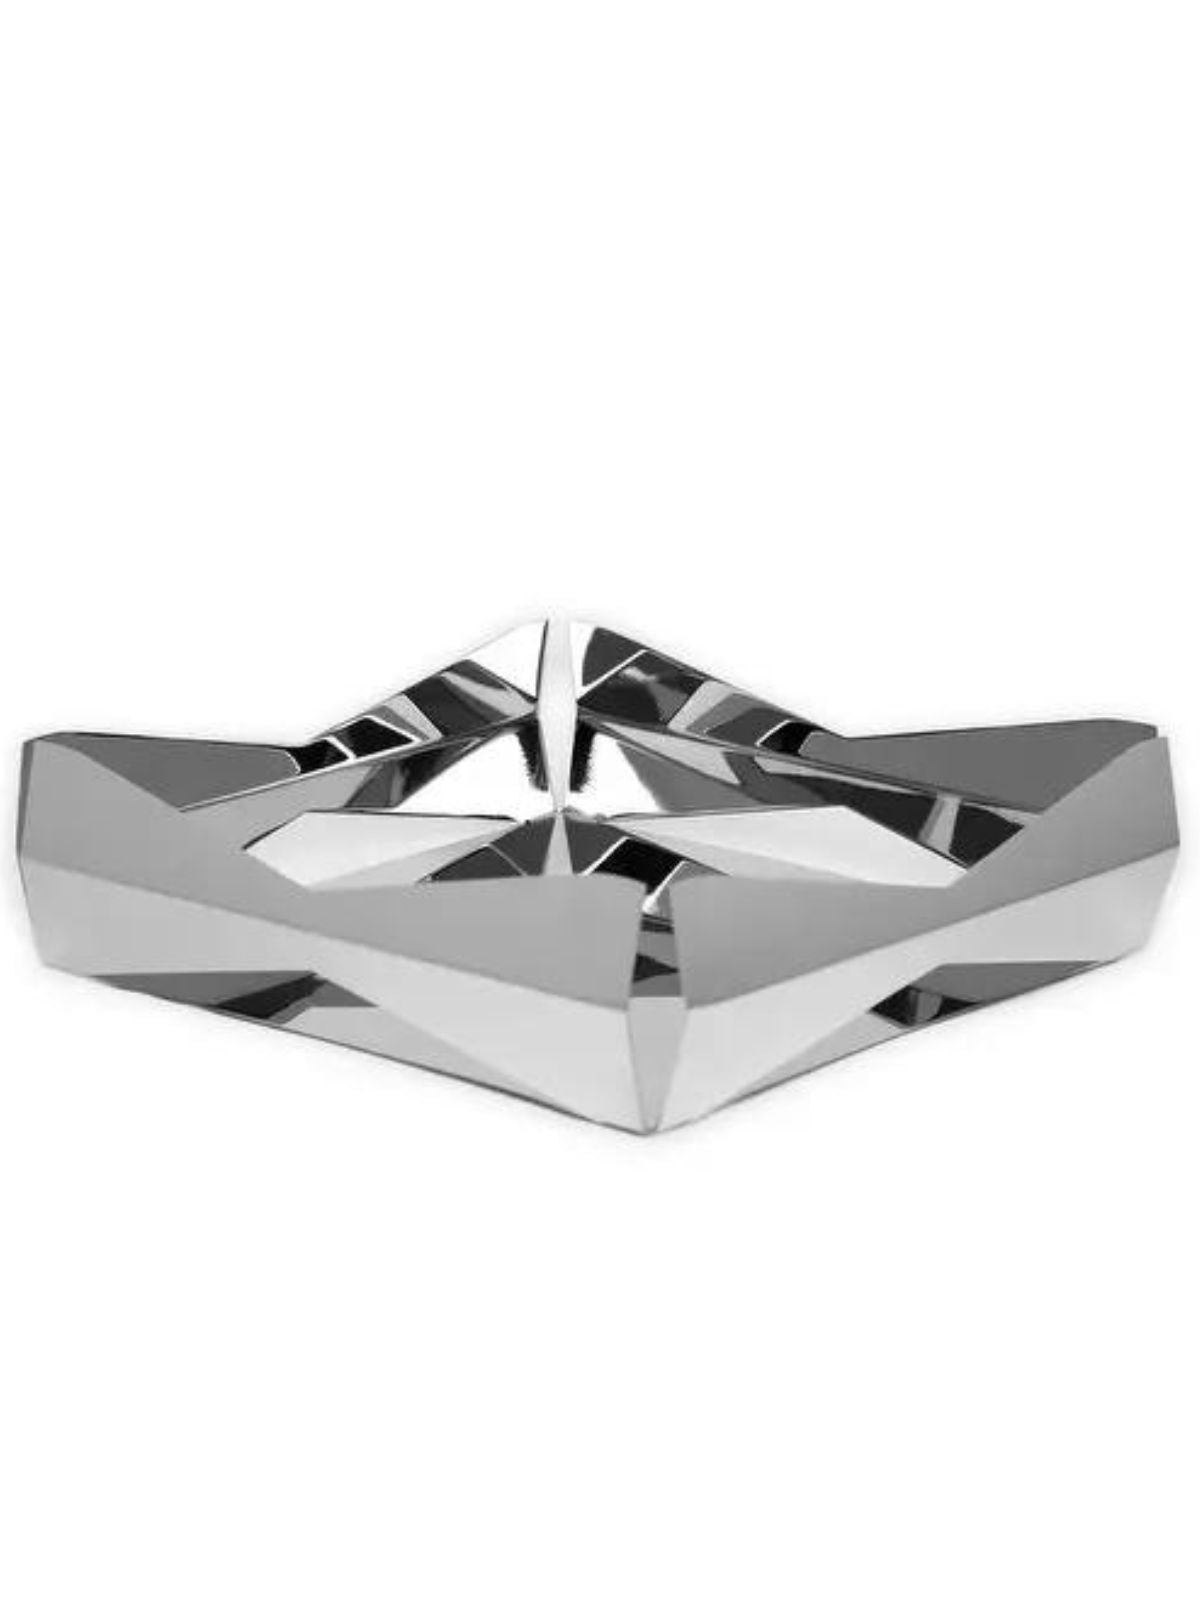 Chrome Stainless Steel Square Decorative Tray with V Design sold by KYA Home Decor, 8W x 8L.